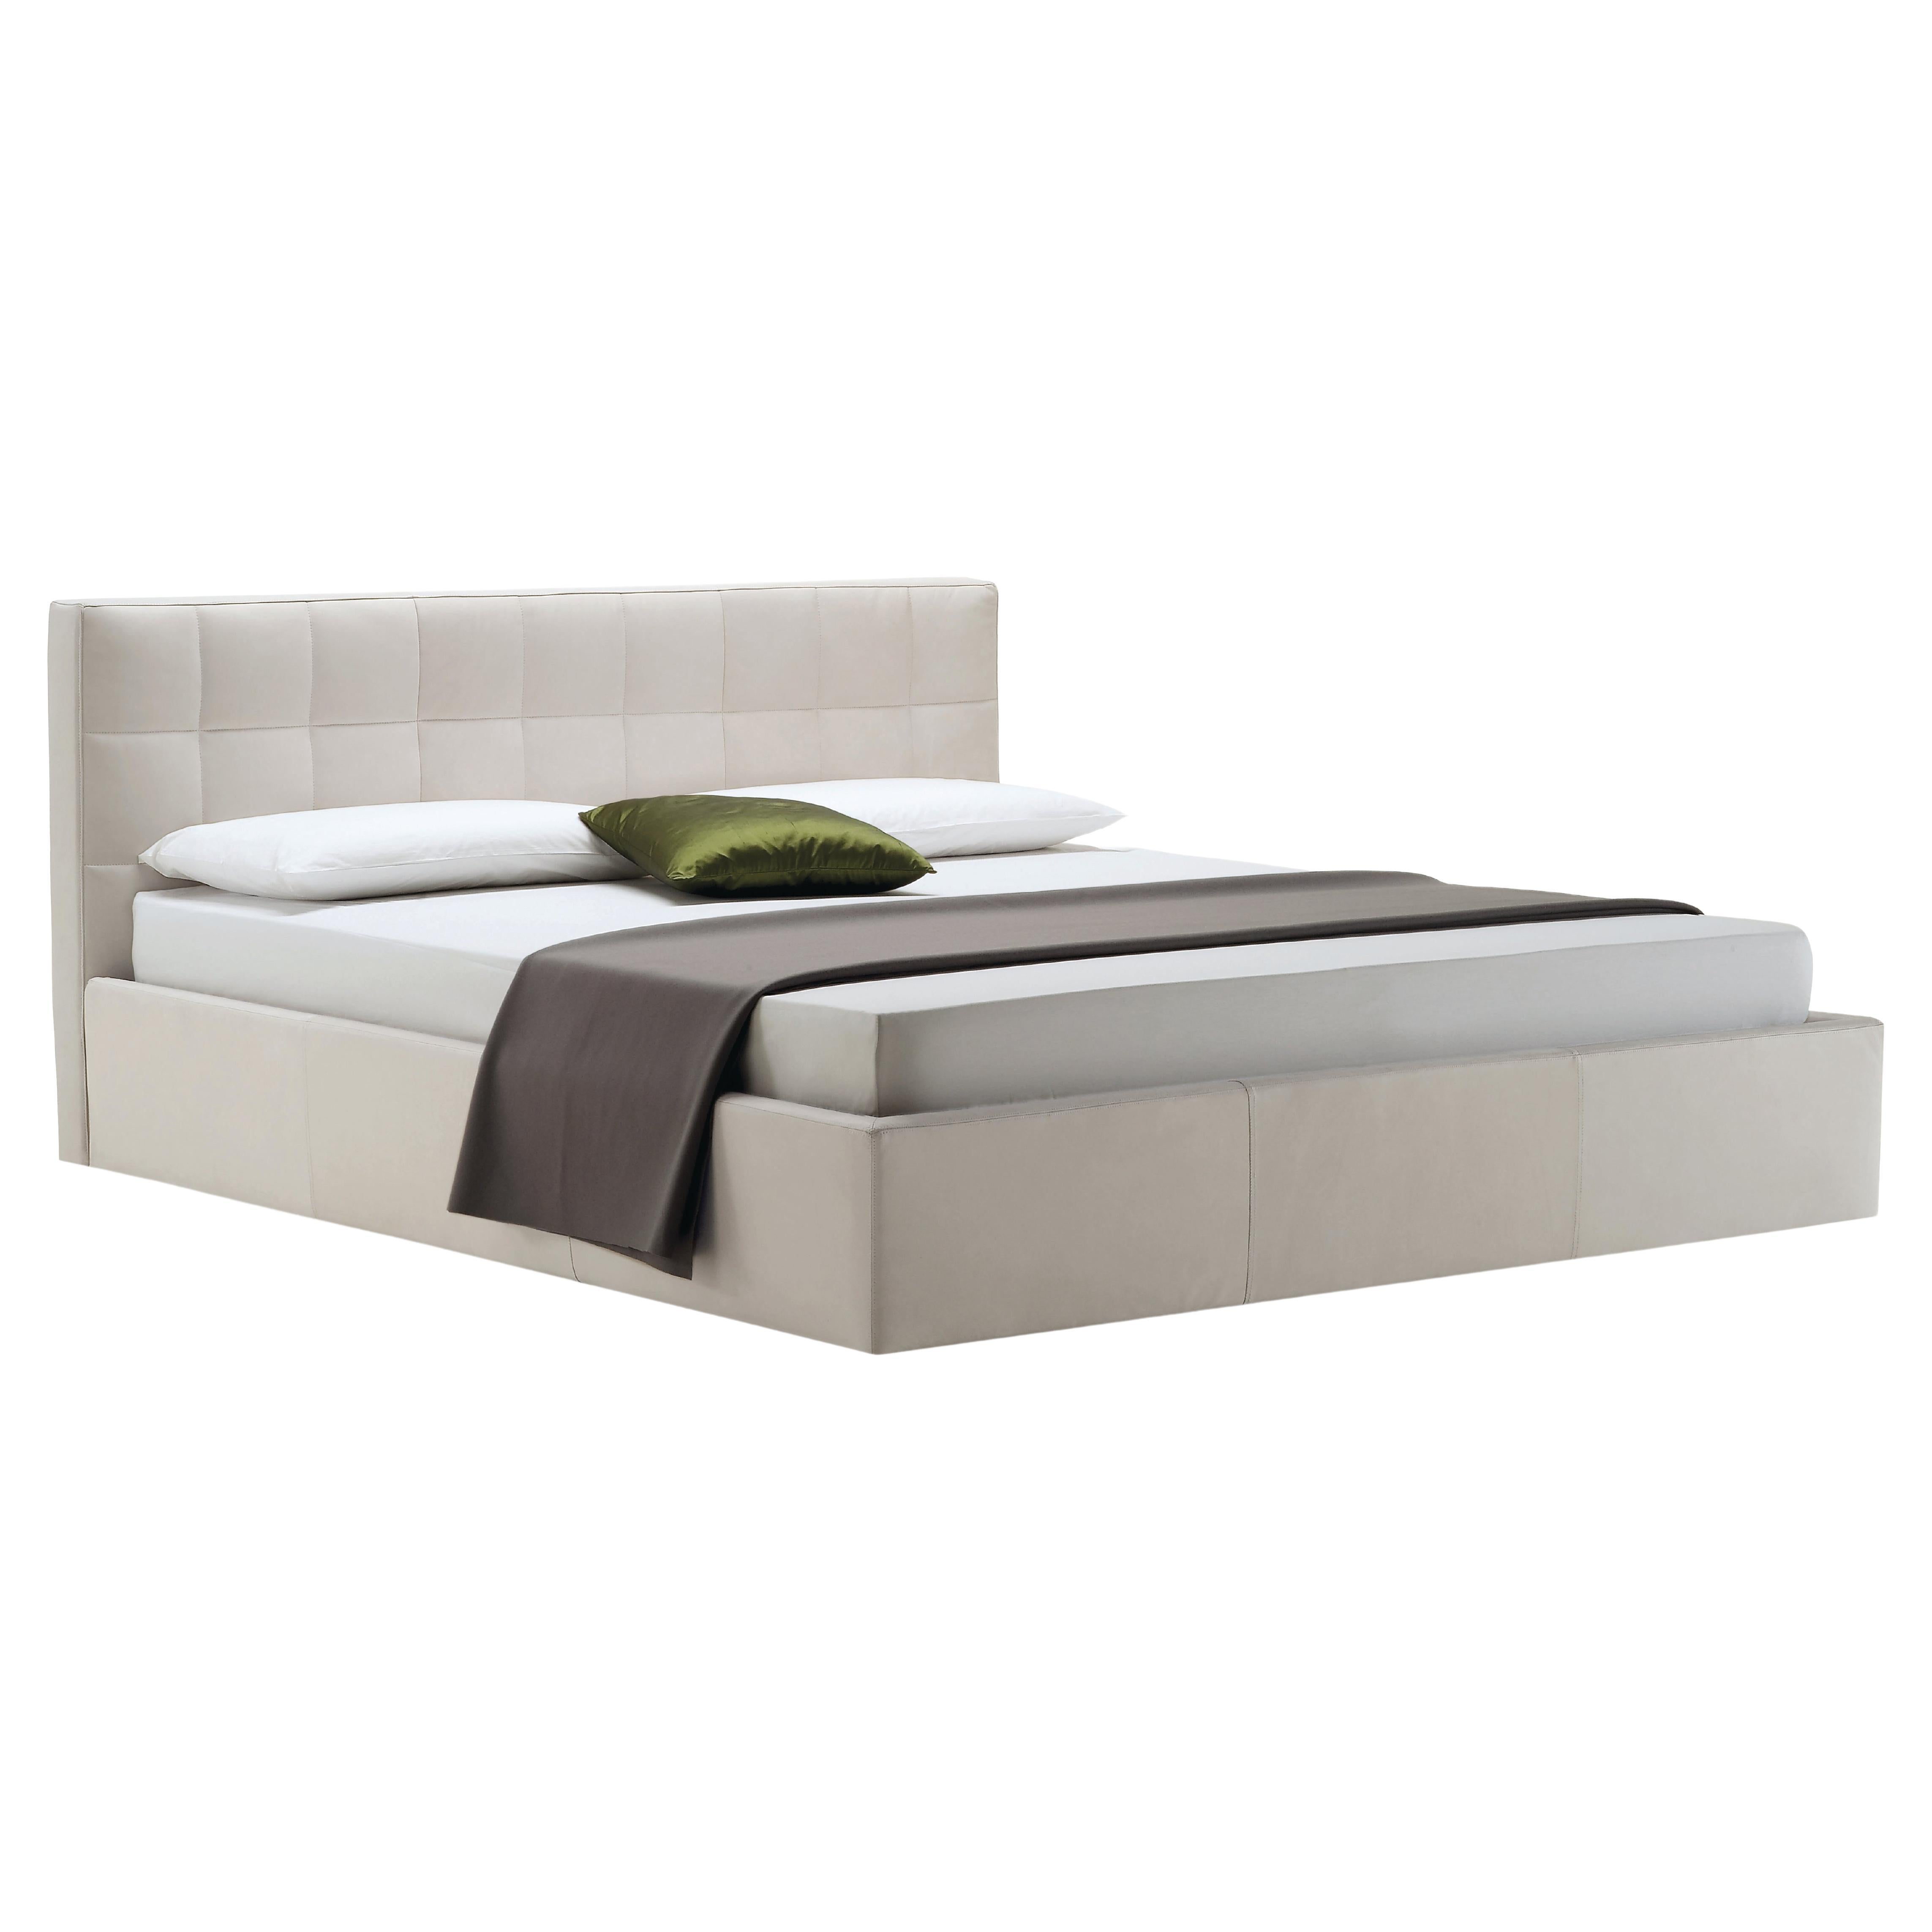 Zanotta Small Box Bed with Container Unit in Beige Upholstery with Steel Frame For Sale